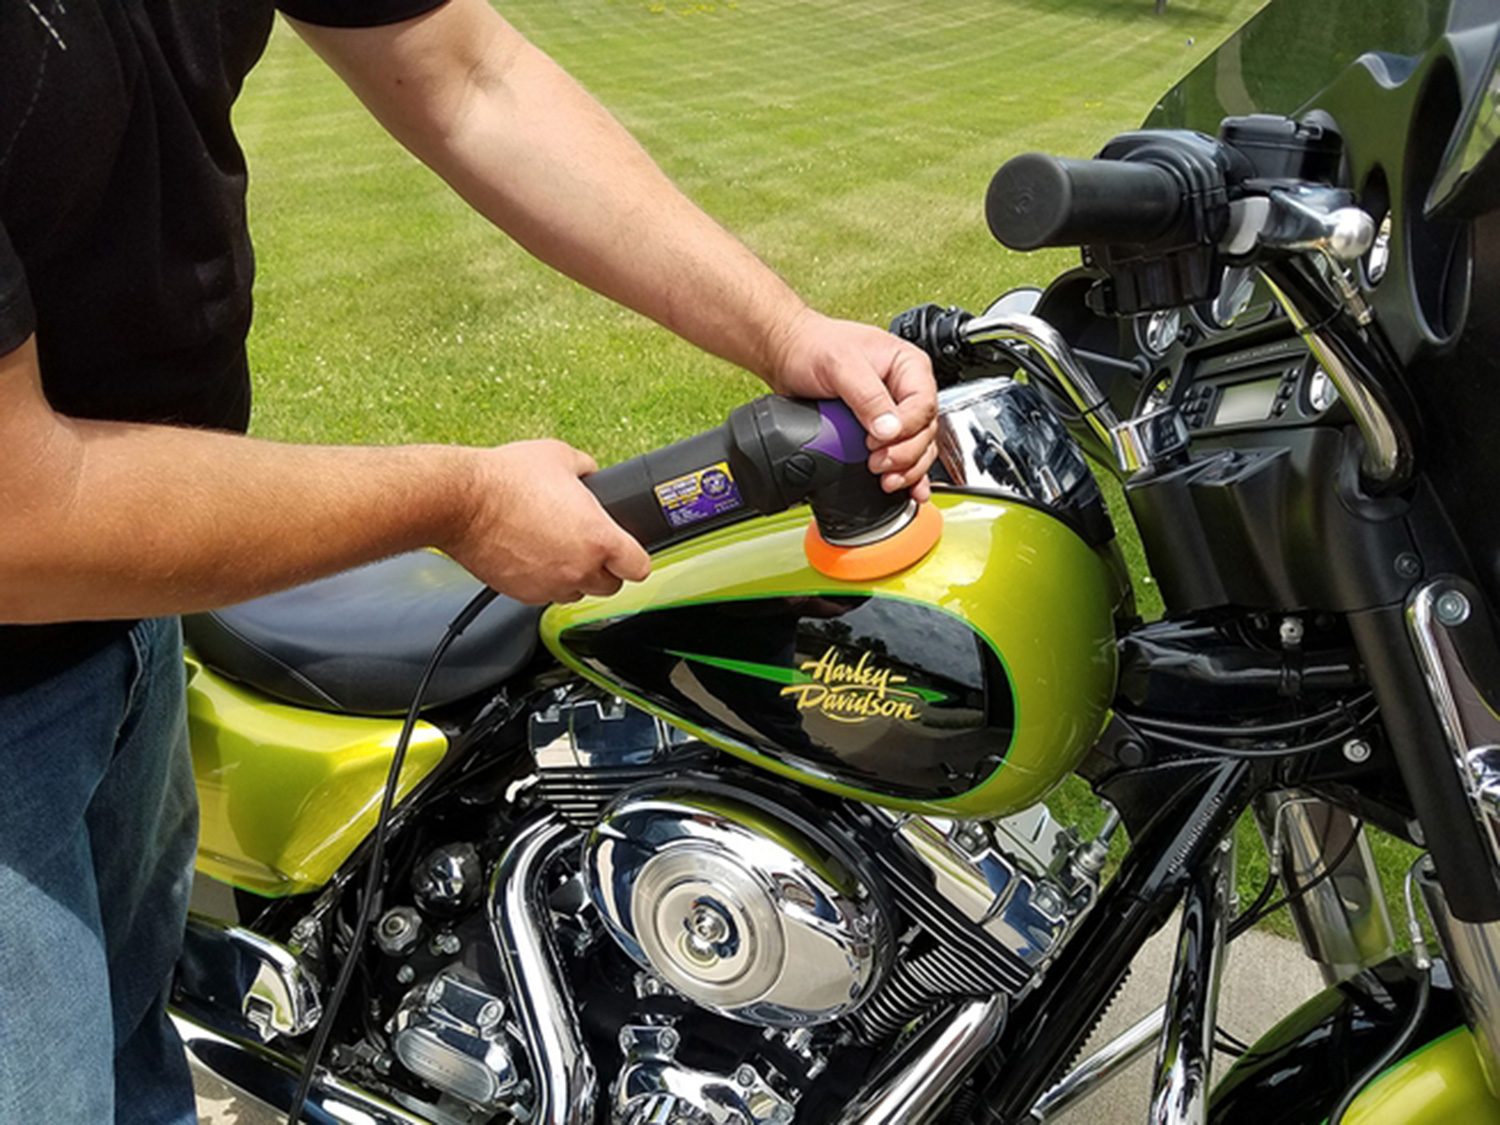 Five of the best motorcycle cleaning products